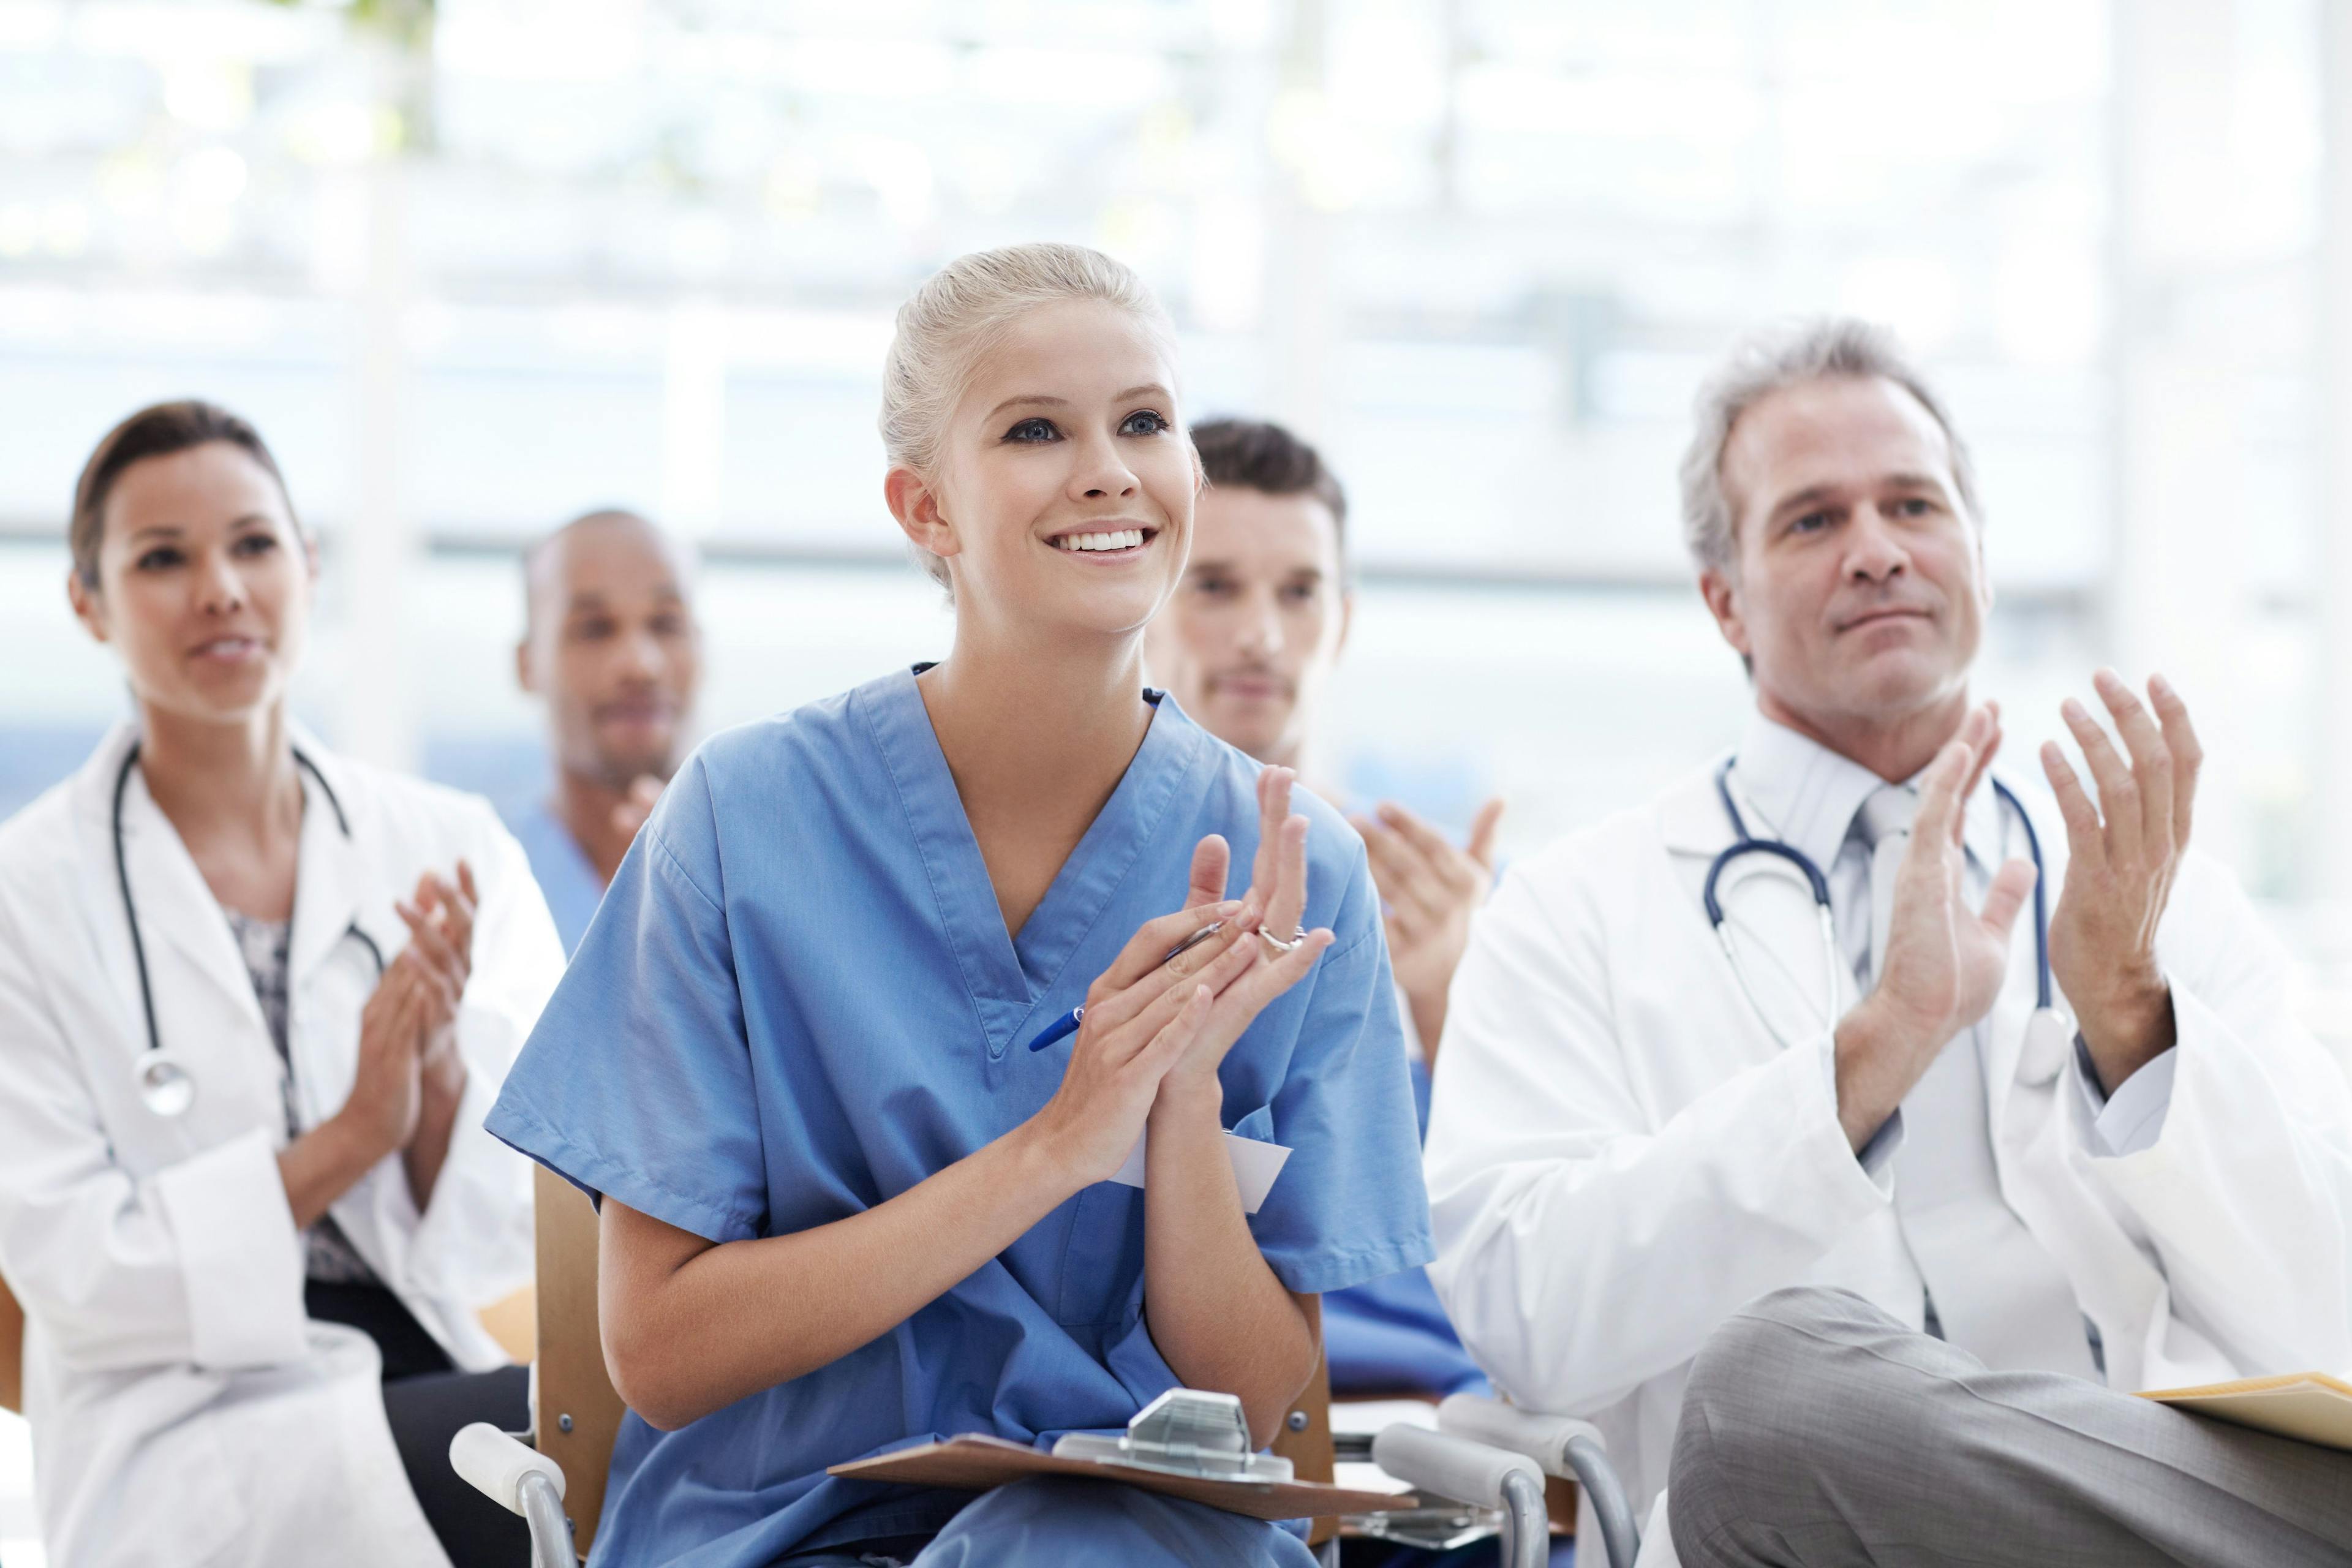 Celebrating breakthroughs in health care. Doctors and nurses applauding their lecturer: © Stigur/peopleimages.com - stock.adobe.com